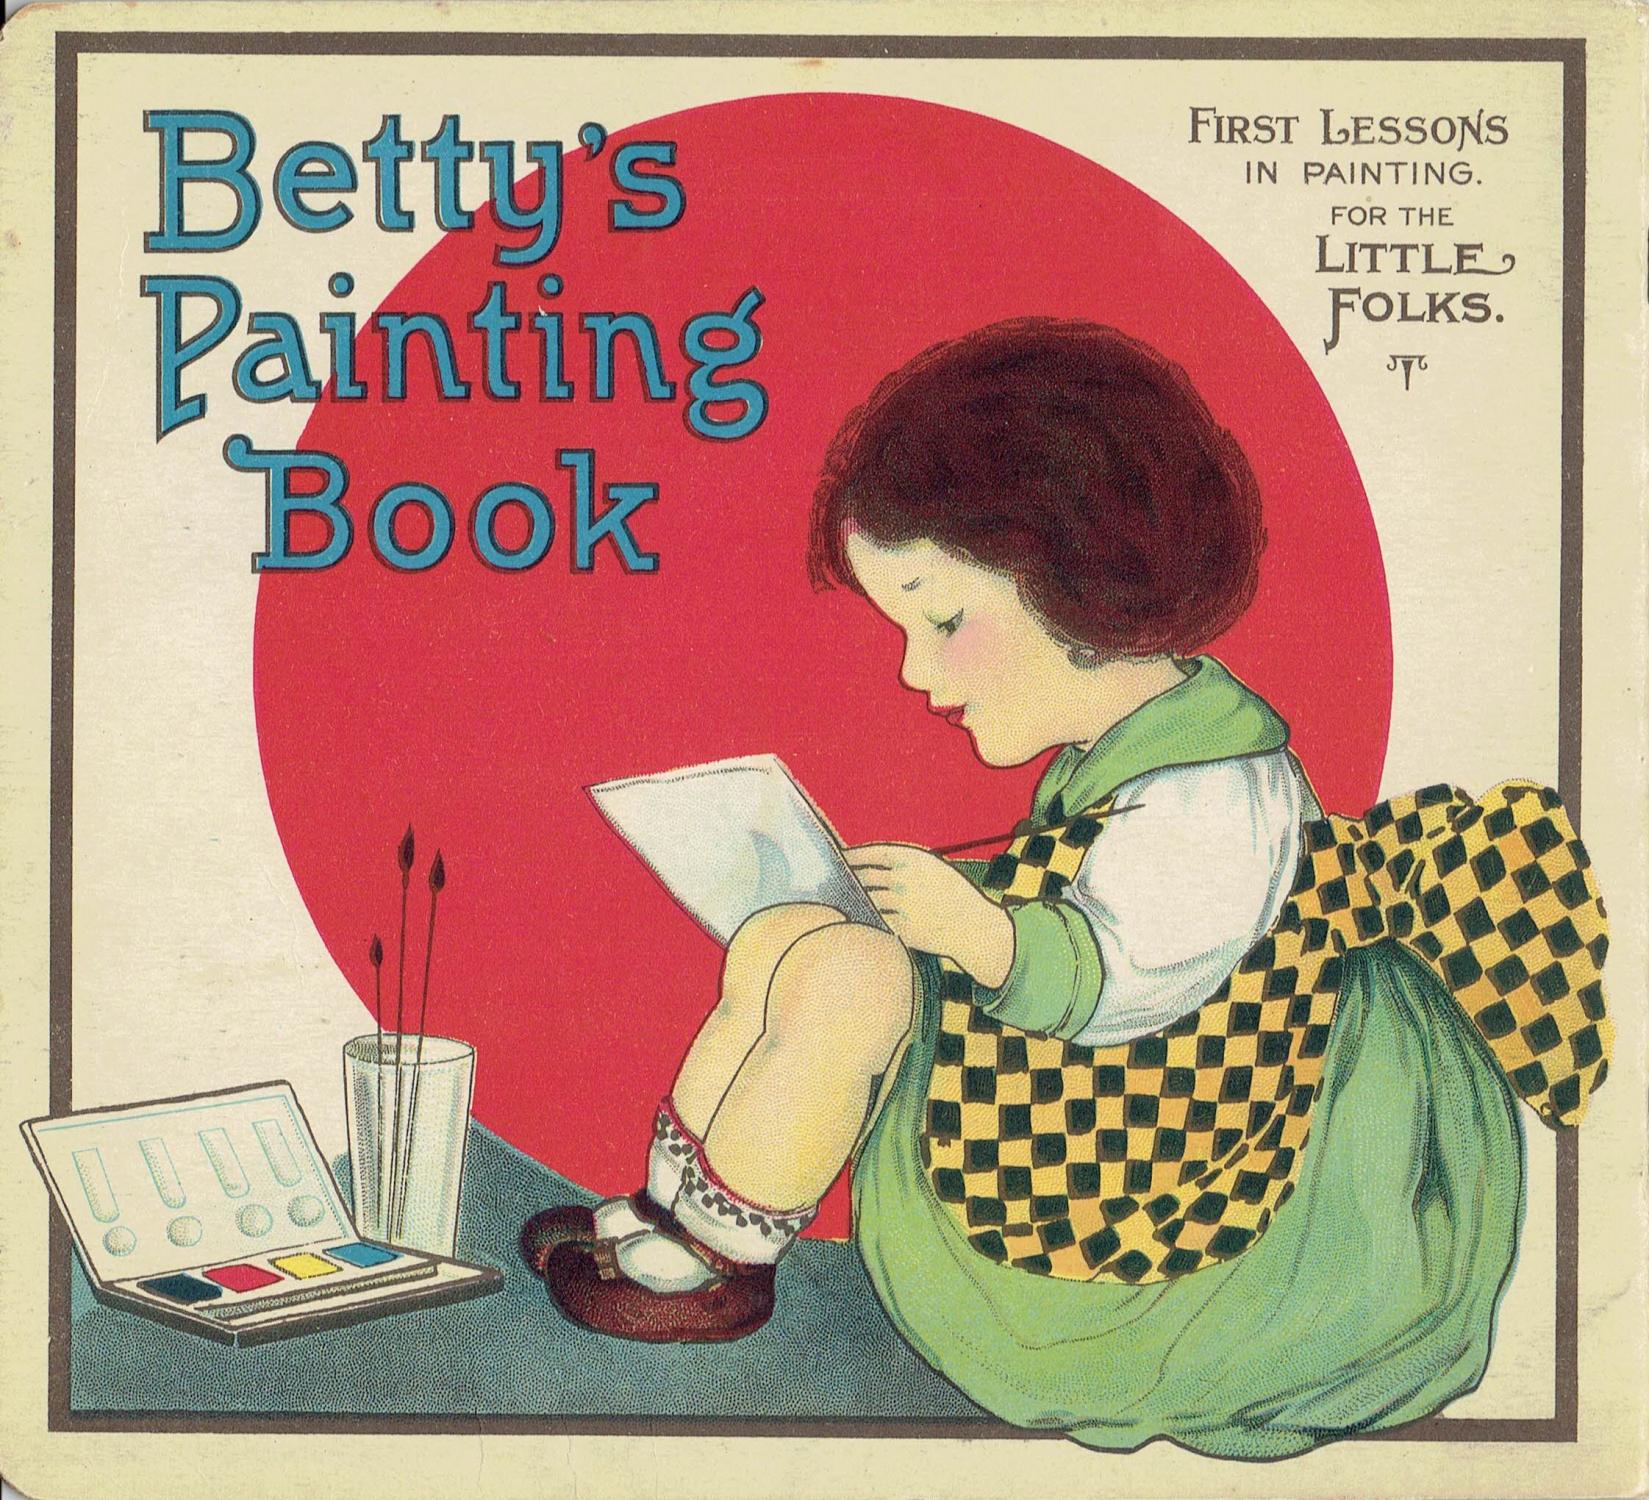 BETTY'S PAINTING BOOK: FIRST LESSONS IN PAINTING. FOR THE LITTLE FOLKS  (code No. 16) by Price, Margaret Evans: Fine Soft cover (1917)